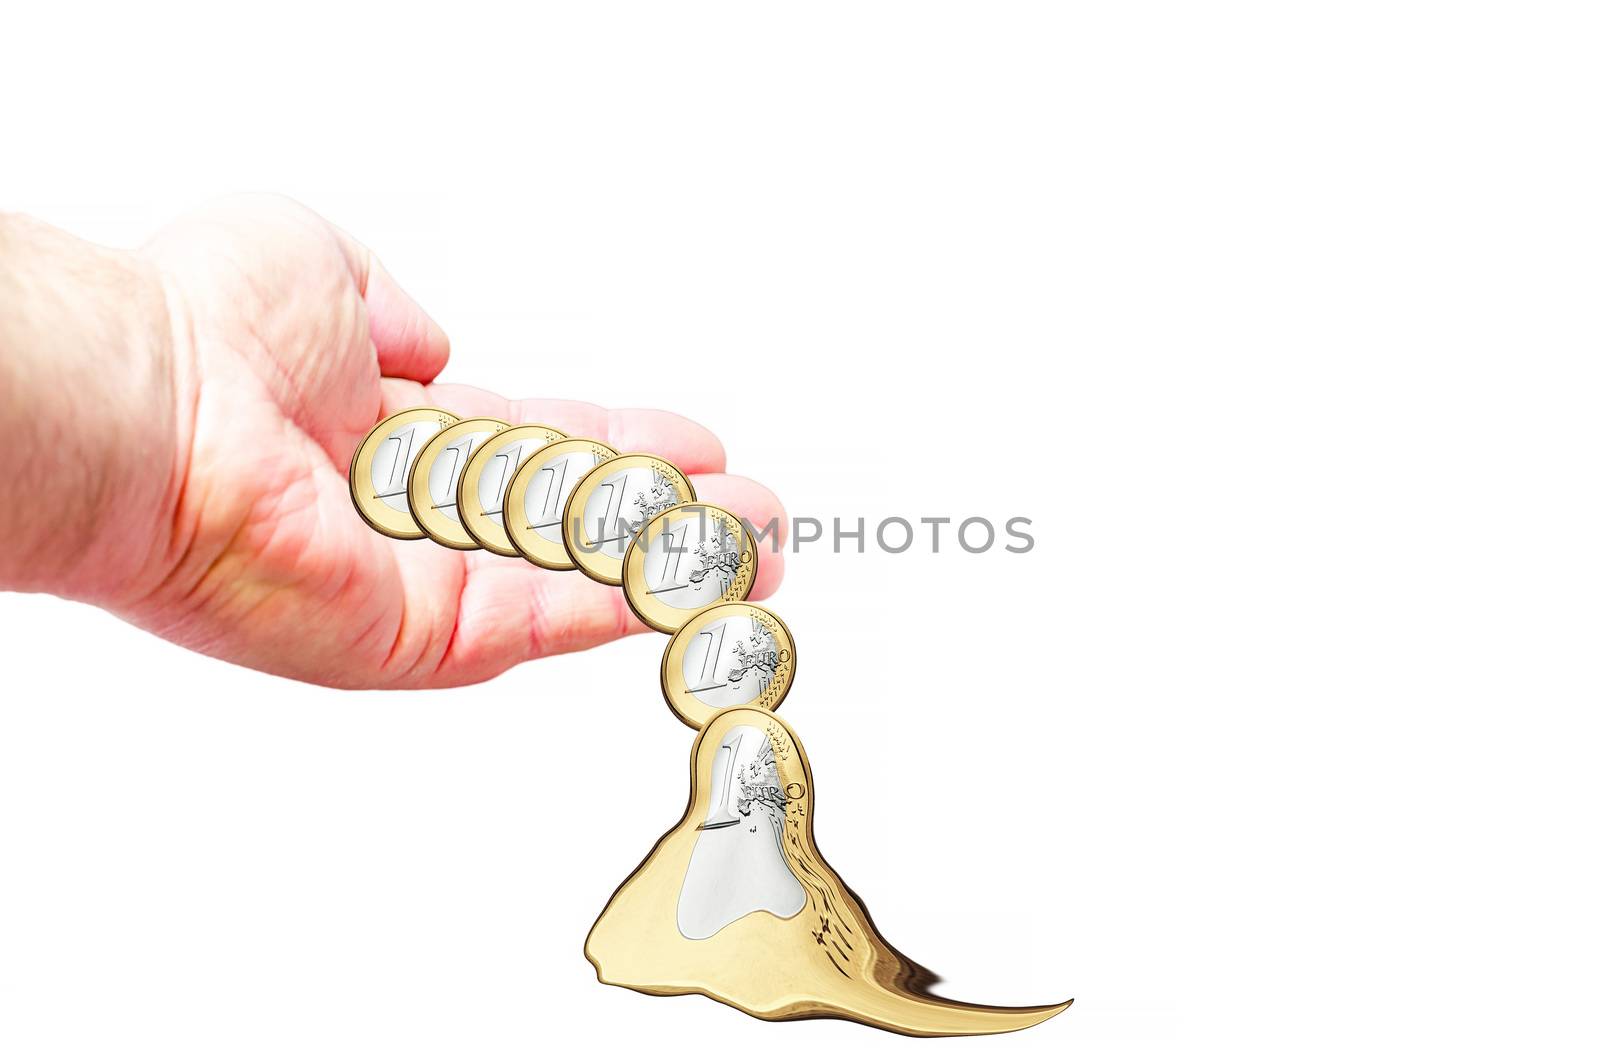 Euro coins falling from his hand, Photo Illustration, loss of value.